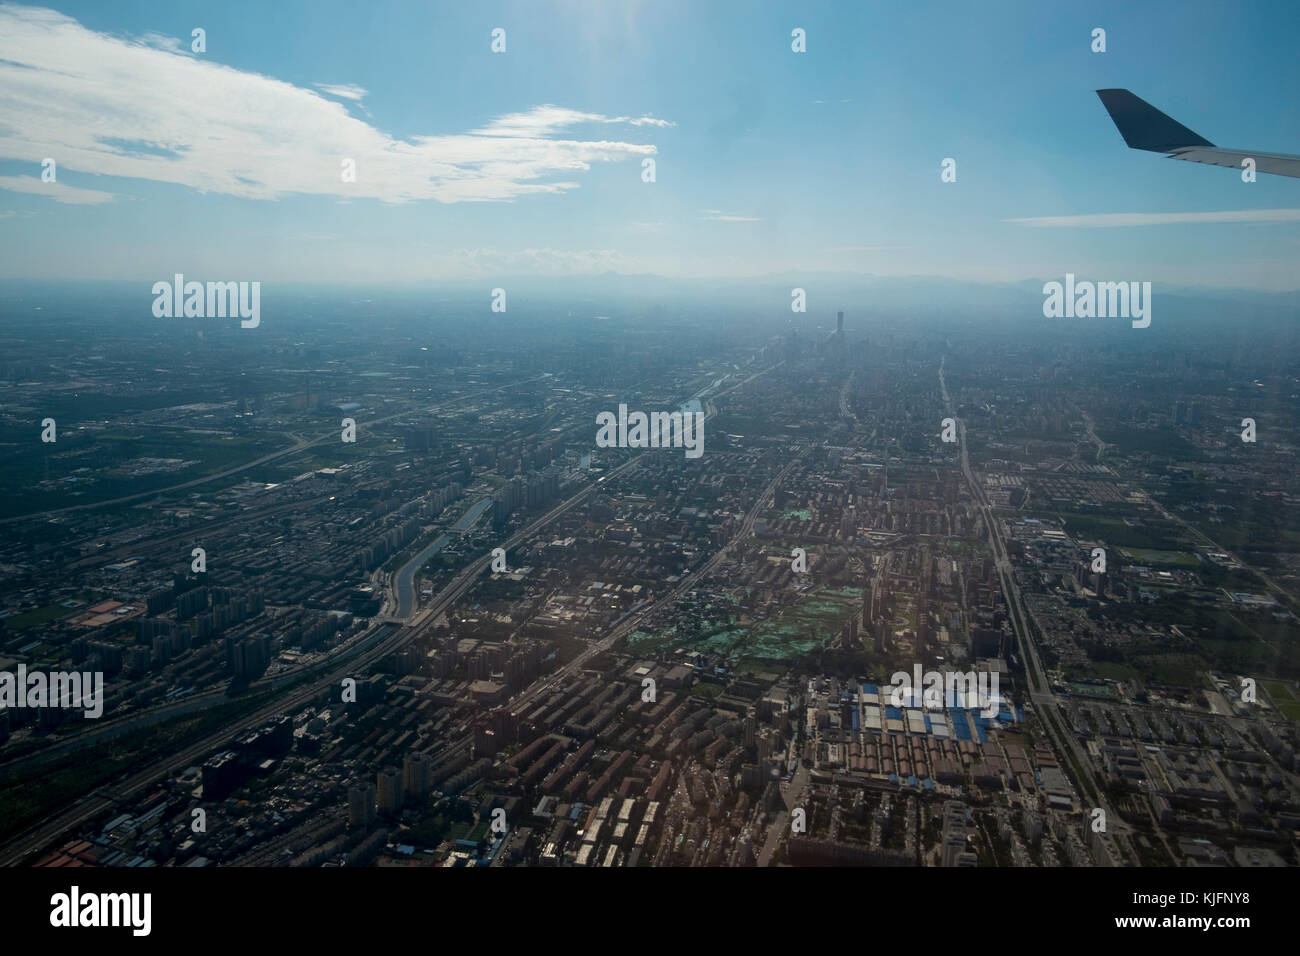 The urban sprawl of Beijing viewed from an aircraft Stock Photo